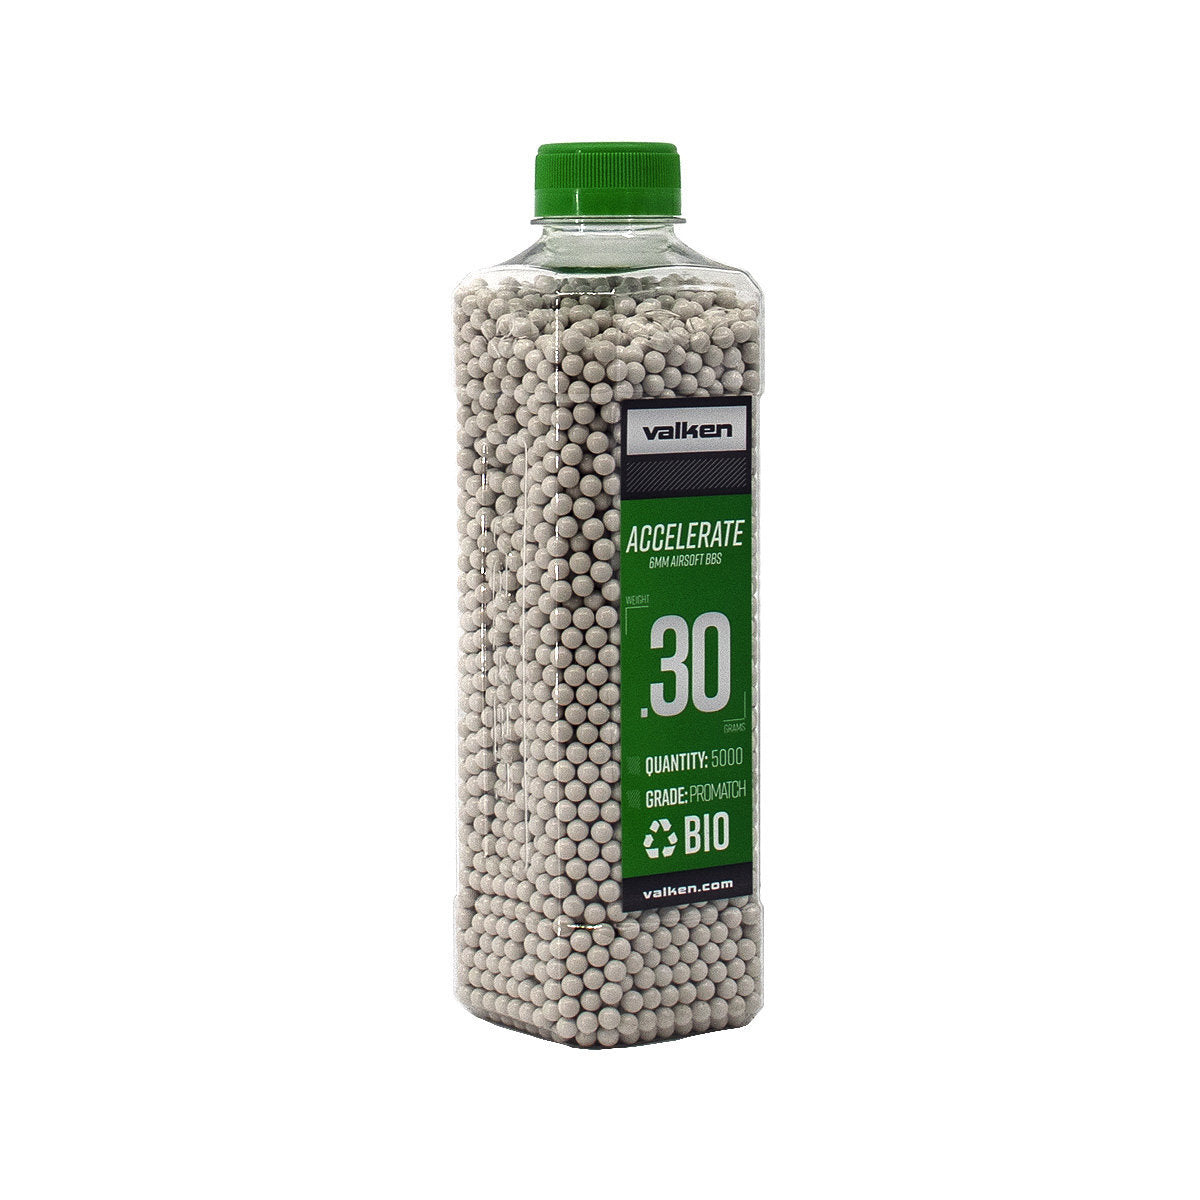 Valken Accelerate Promatch 0.30G 5,000Ct Biodegradable Airsoft Bbs